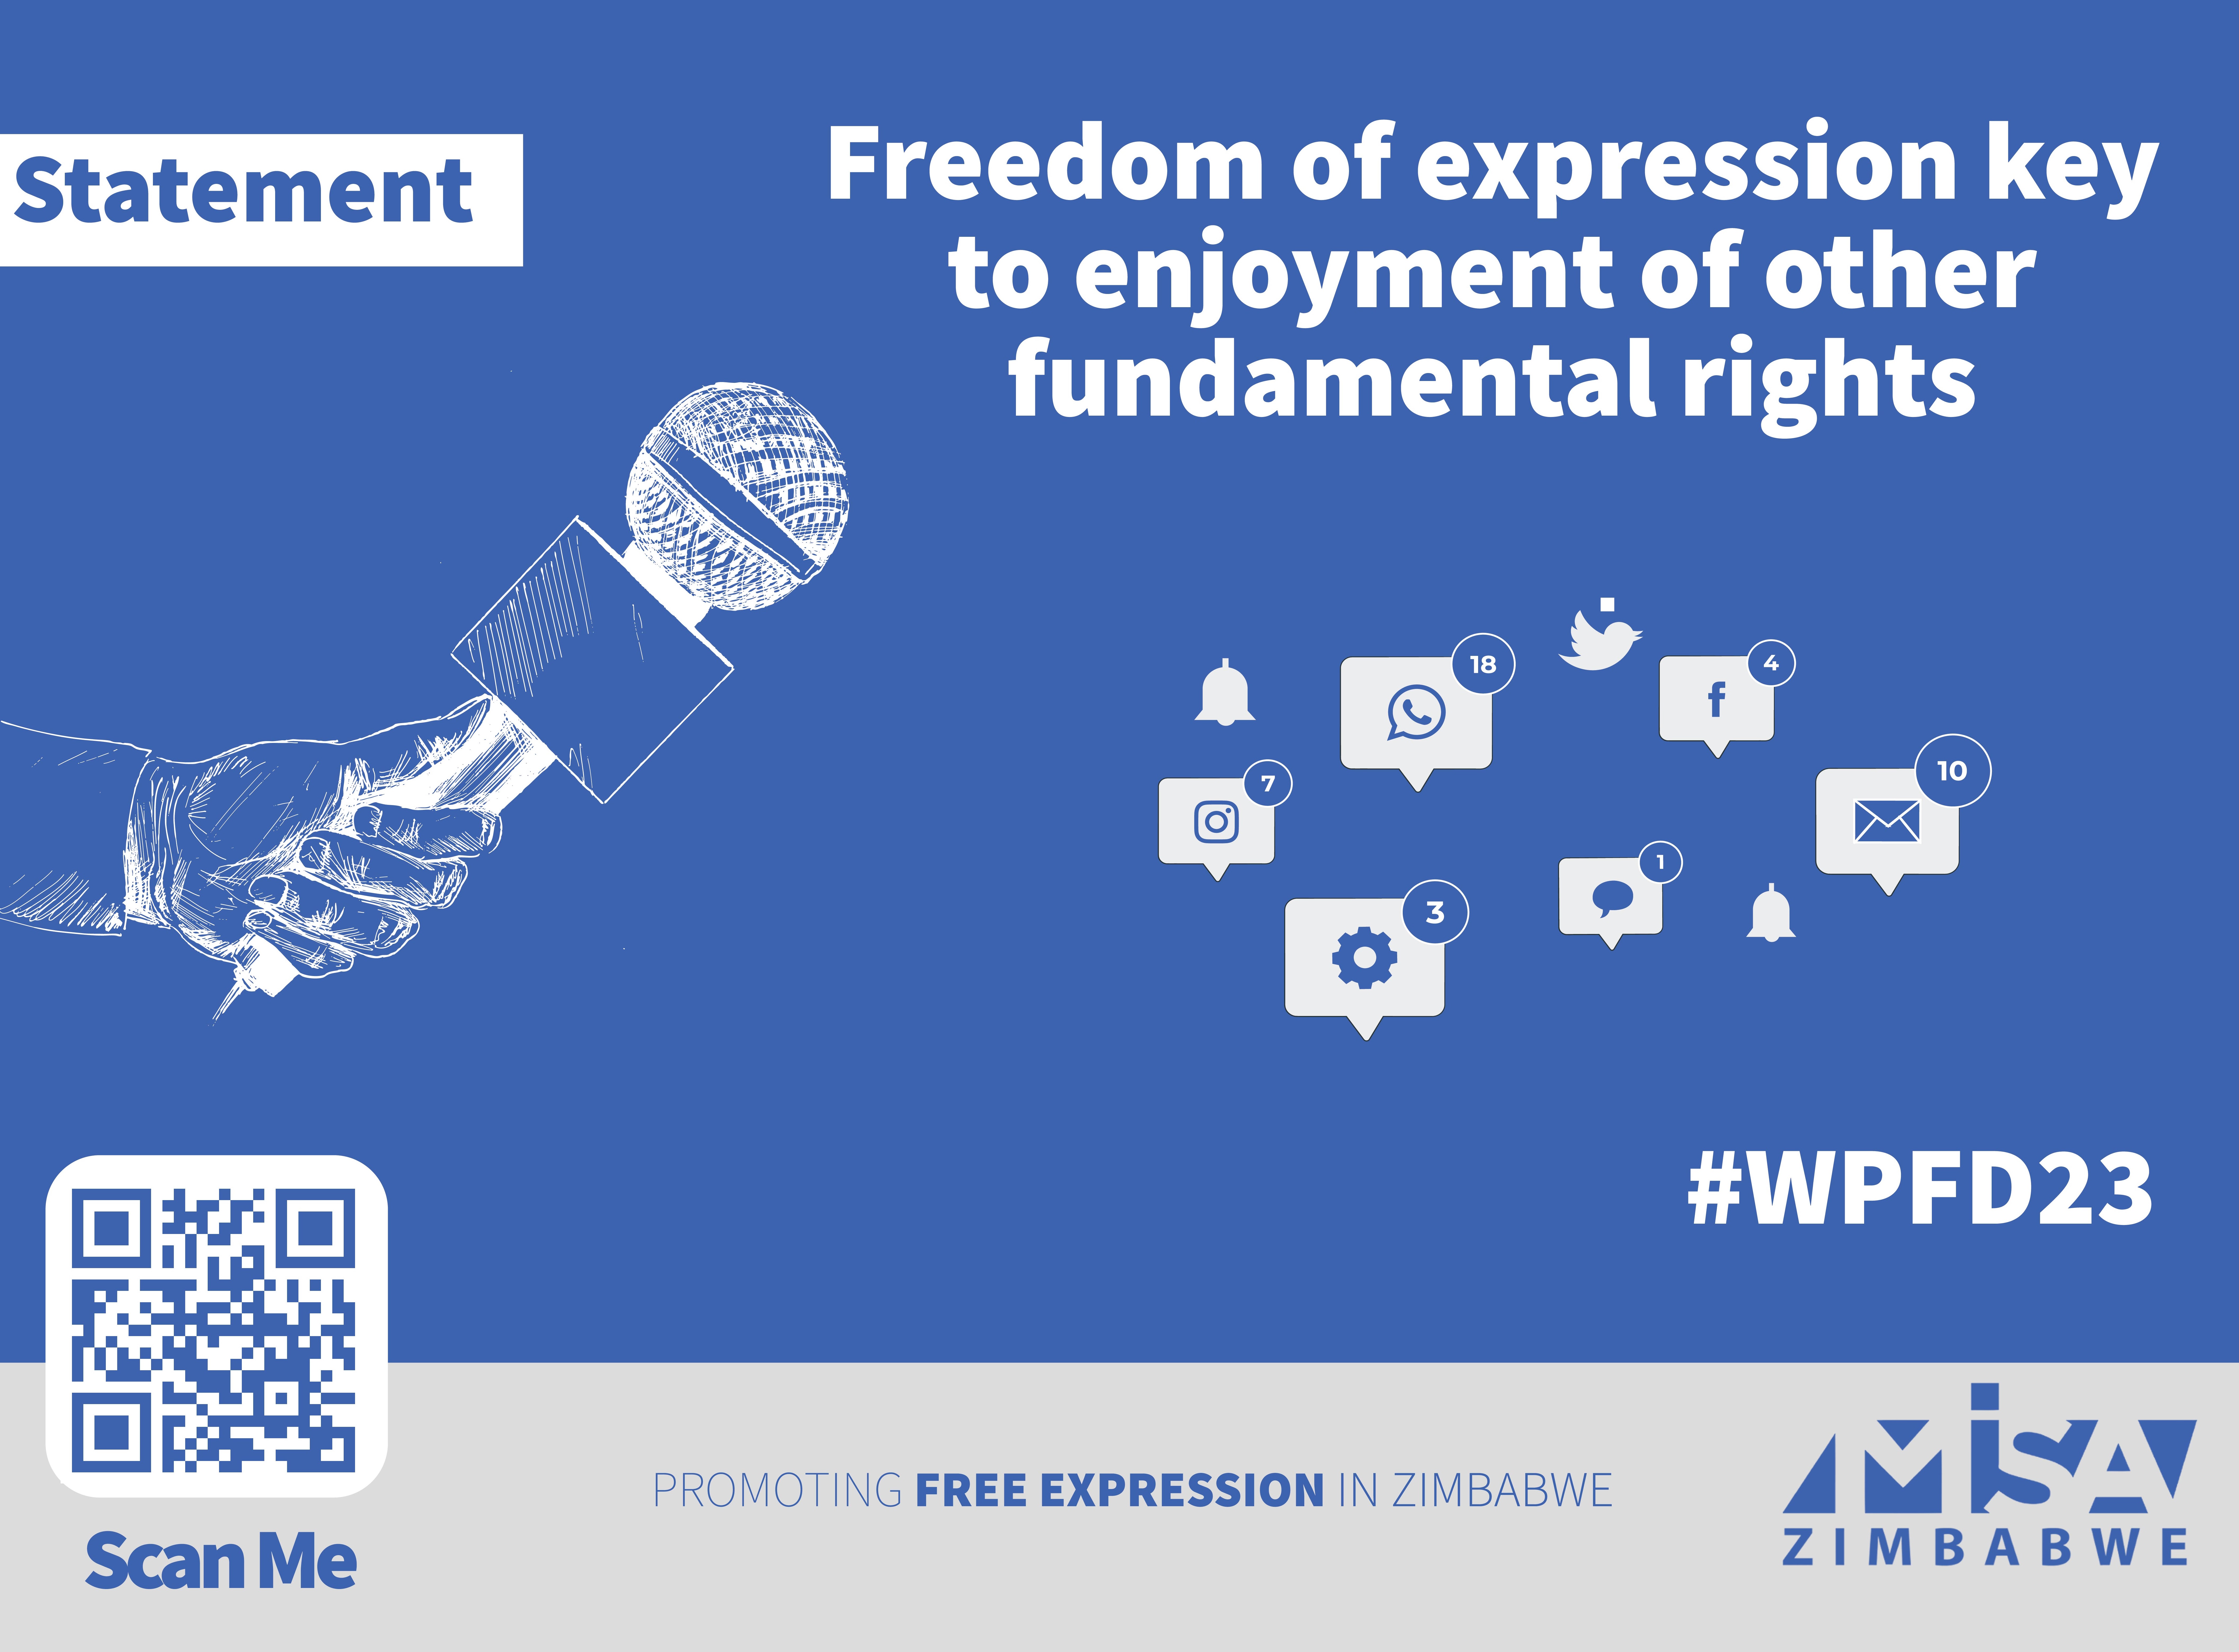 Freedom of expression key to enjoyment of other fundamental rights